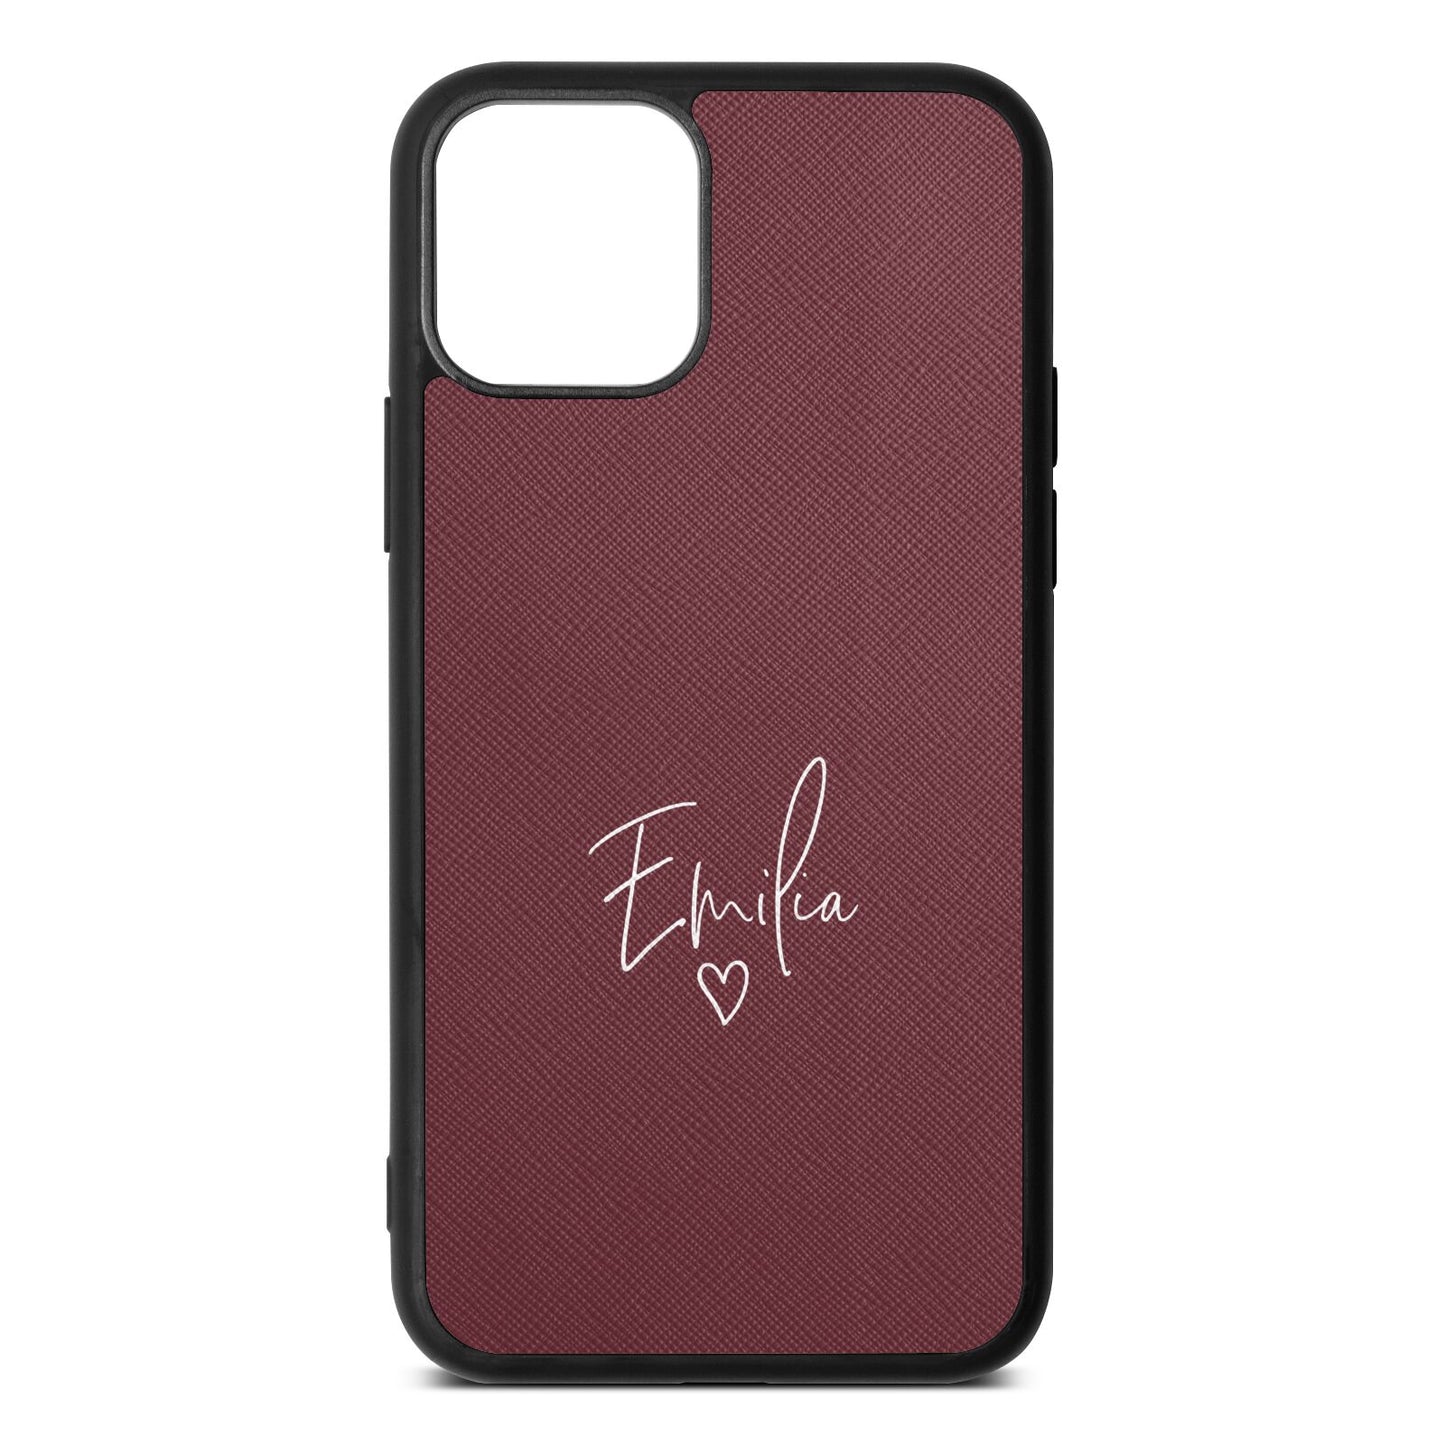 White Handwritten Name Transparent Rose Brown Saffiano Leather iPhone 11 Pro Case